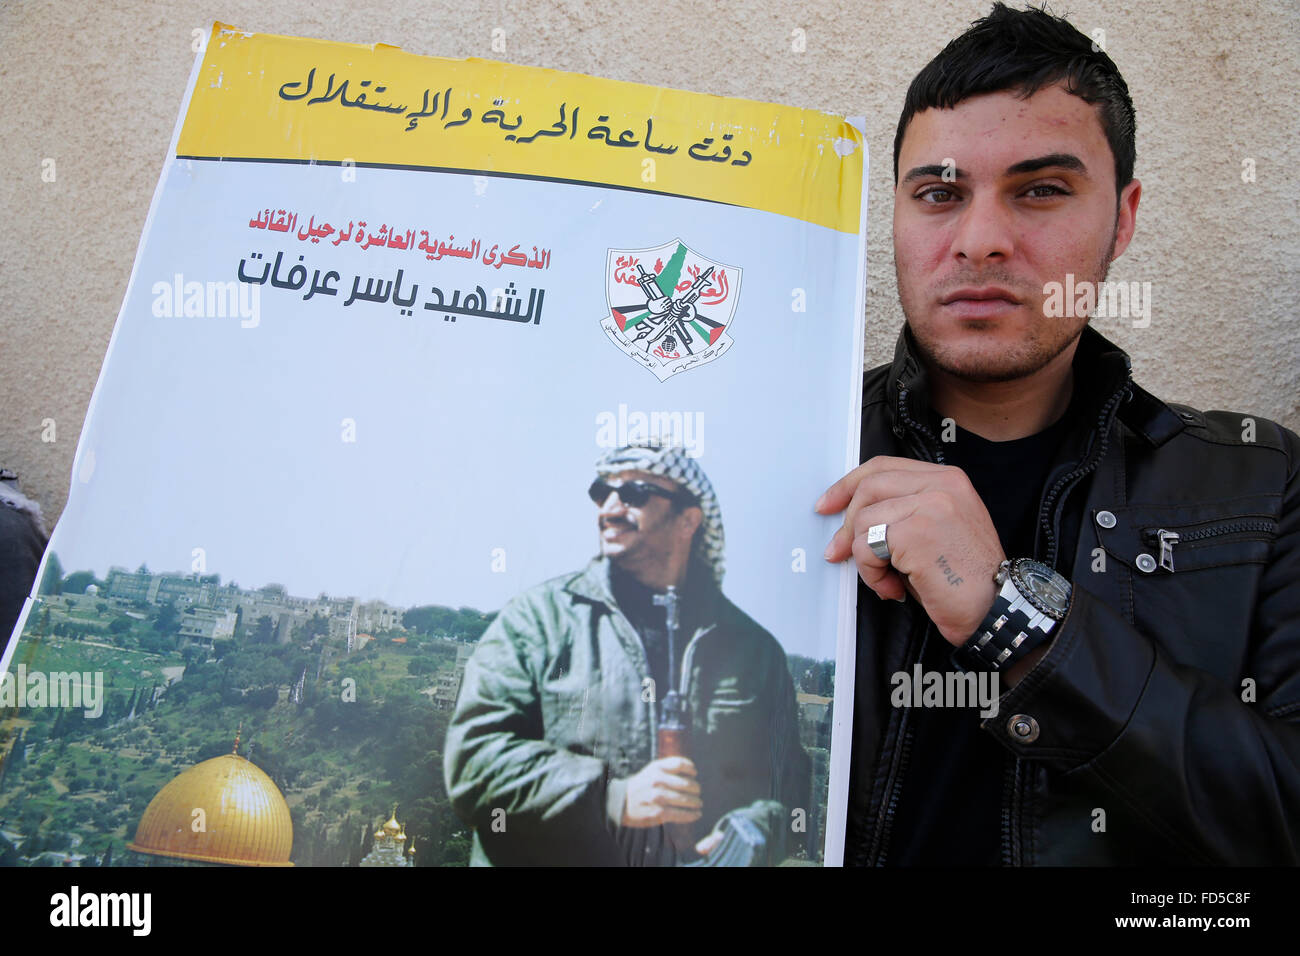 Demonstration in Ramallah on the tenth anniversary of Yasser Arafat's death. Stock Photo